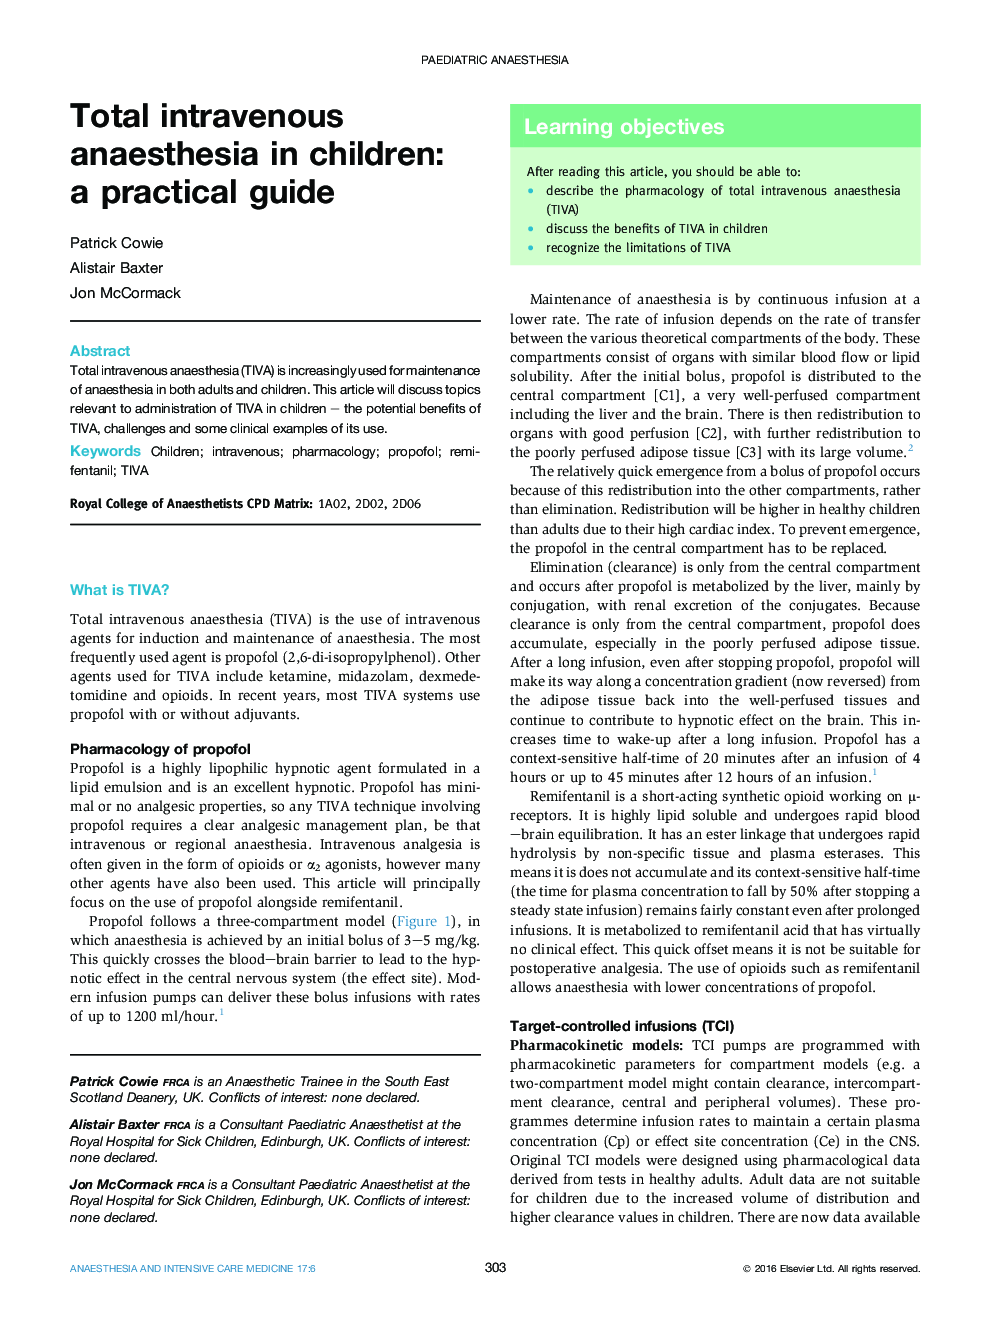 Total intravenous anaesthesia in children: a practical guide